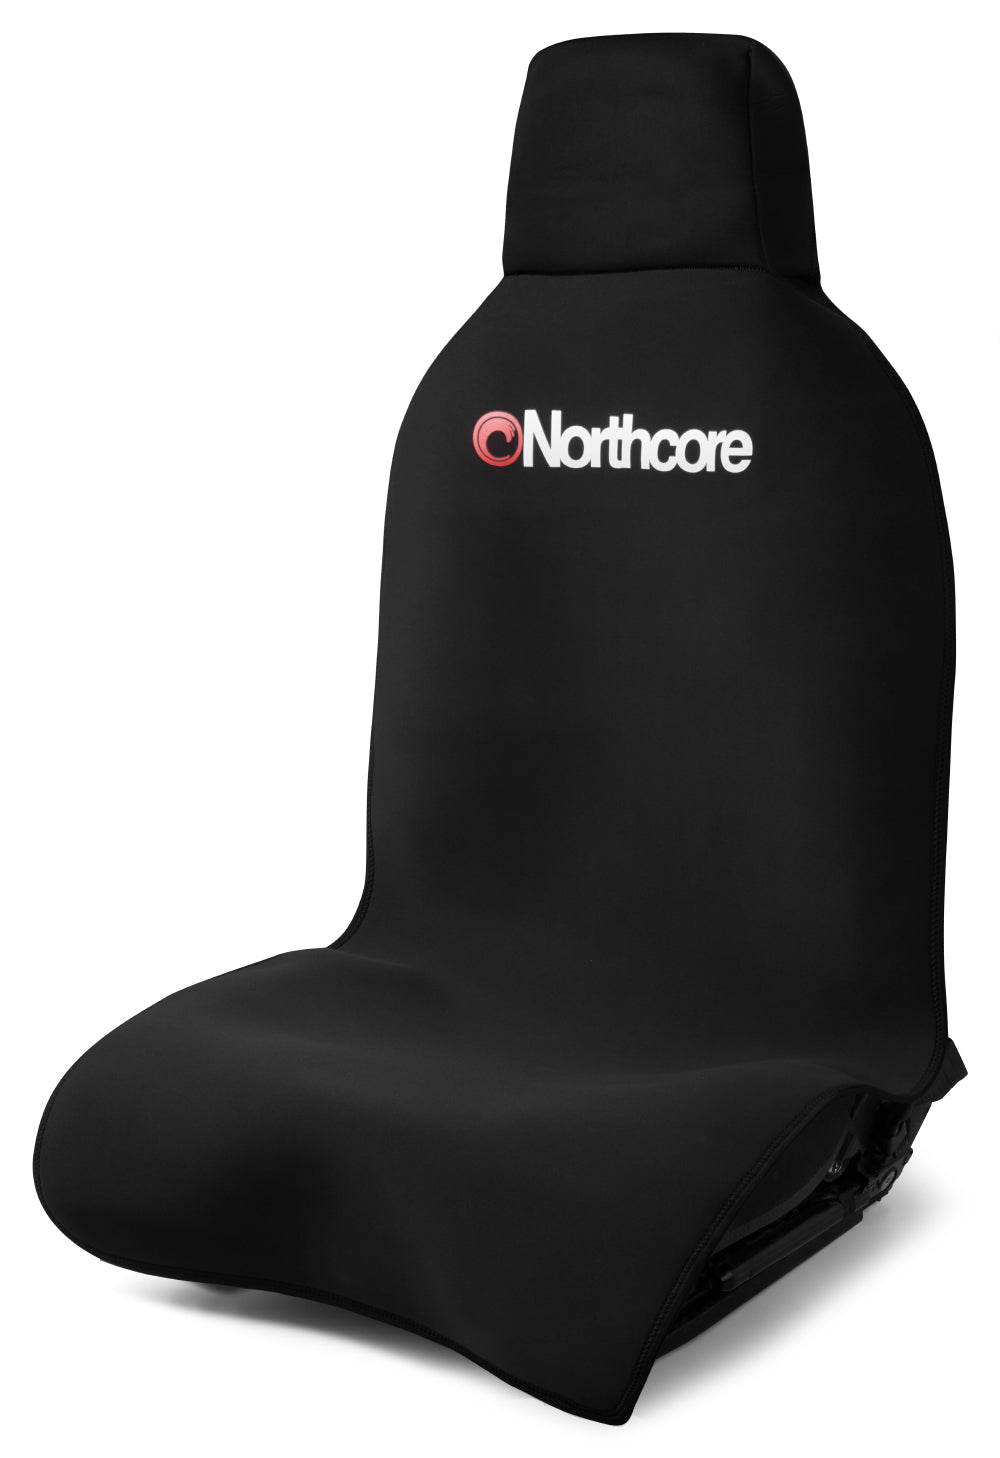 Northcore Water Resistant Neoprene Single Car Seat Cover Black - Boards360